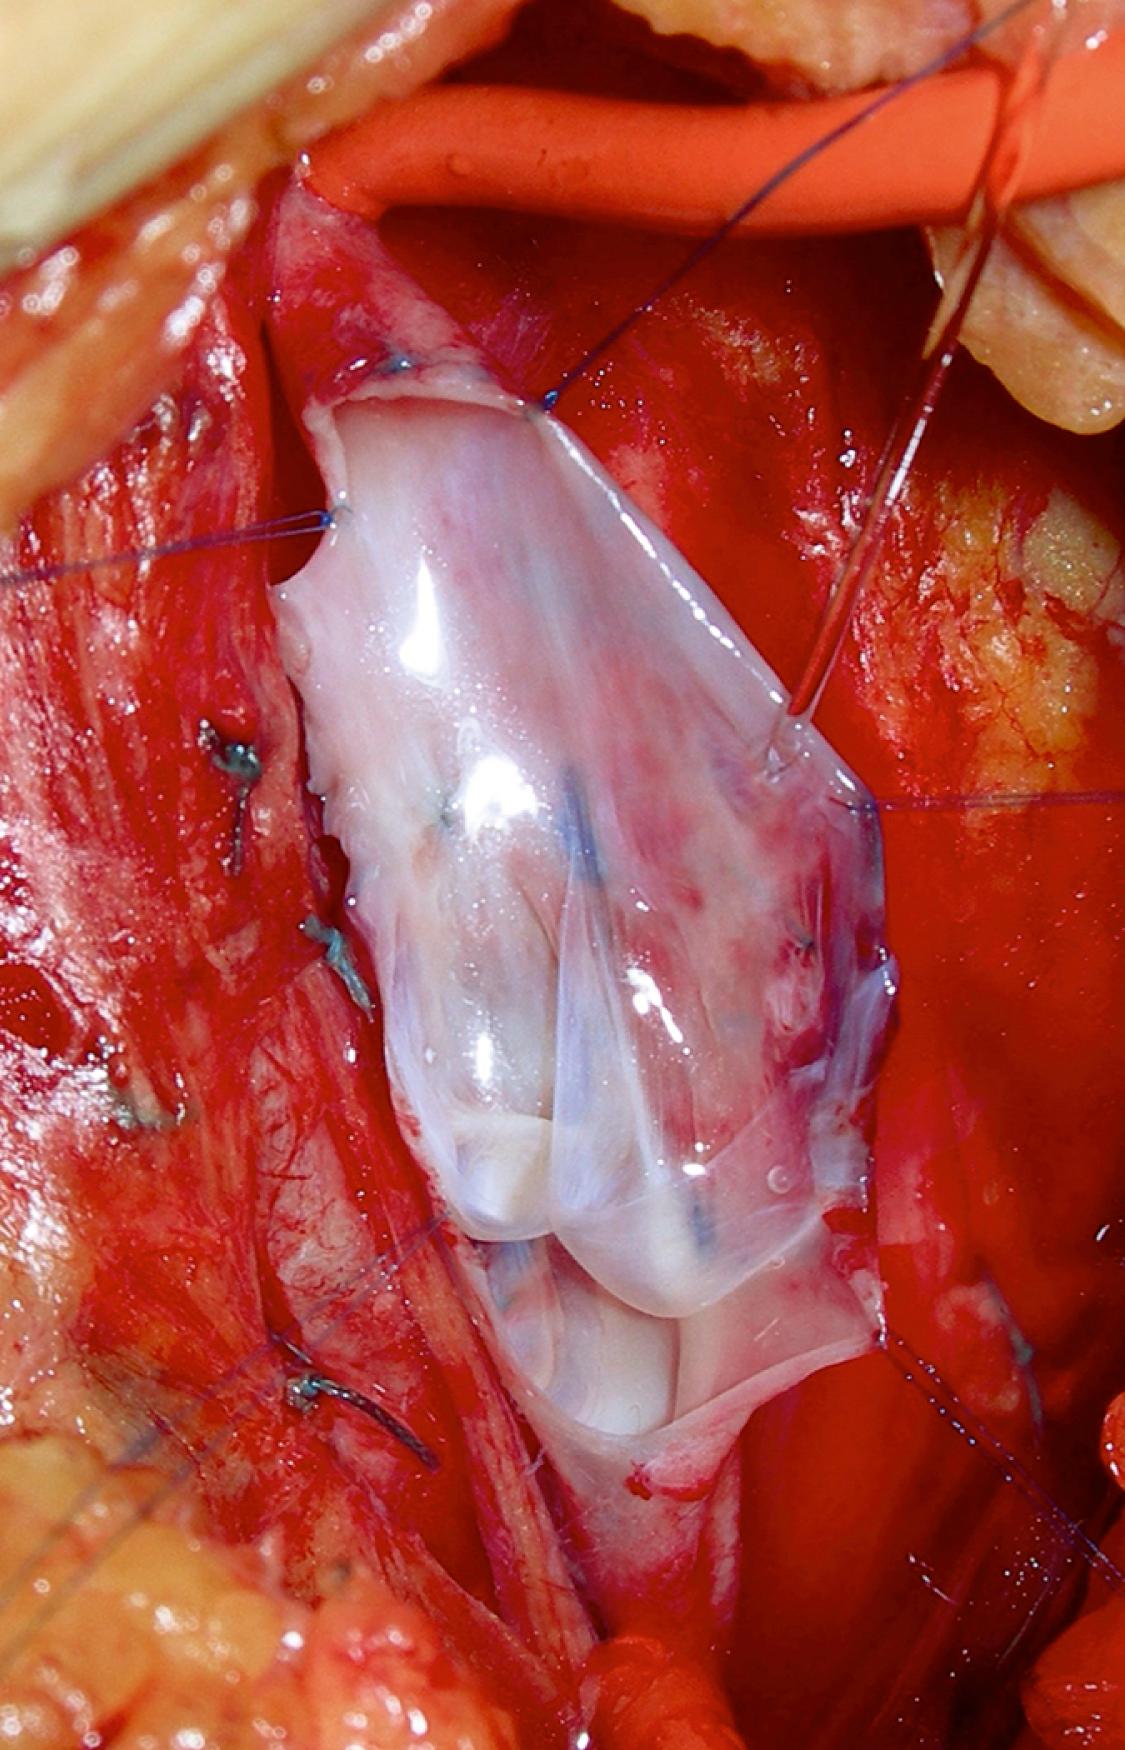 Figure 159.1, Floppy and asymmetrical venous valve leaflets seen after vein opened in the method of Kistner to reveal the valve cusps.